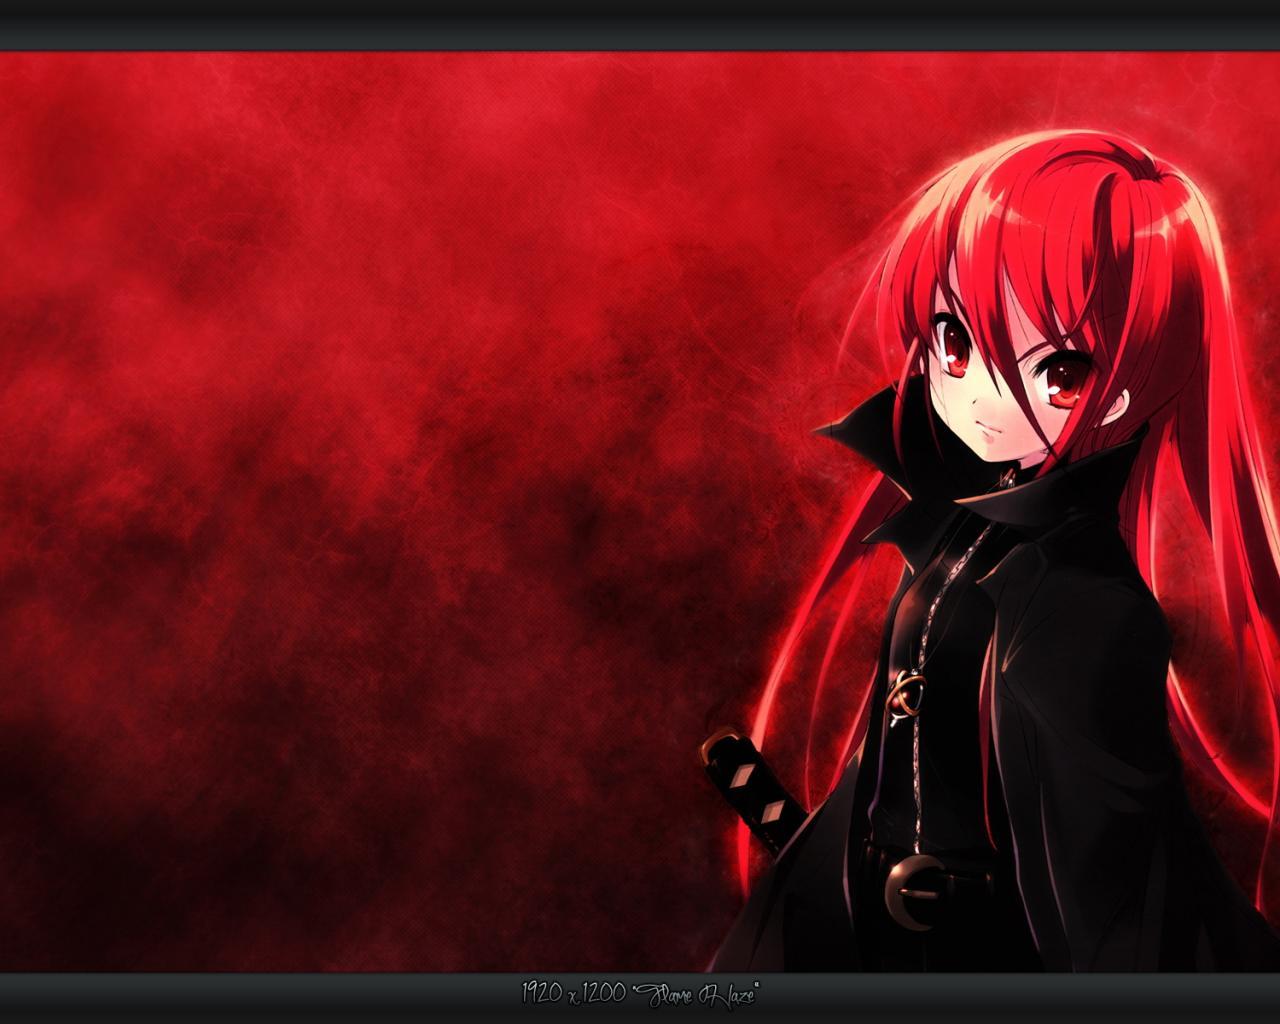 41+] Red Anime Wallpapers